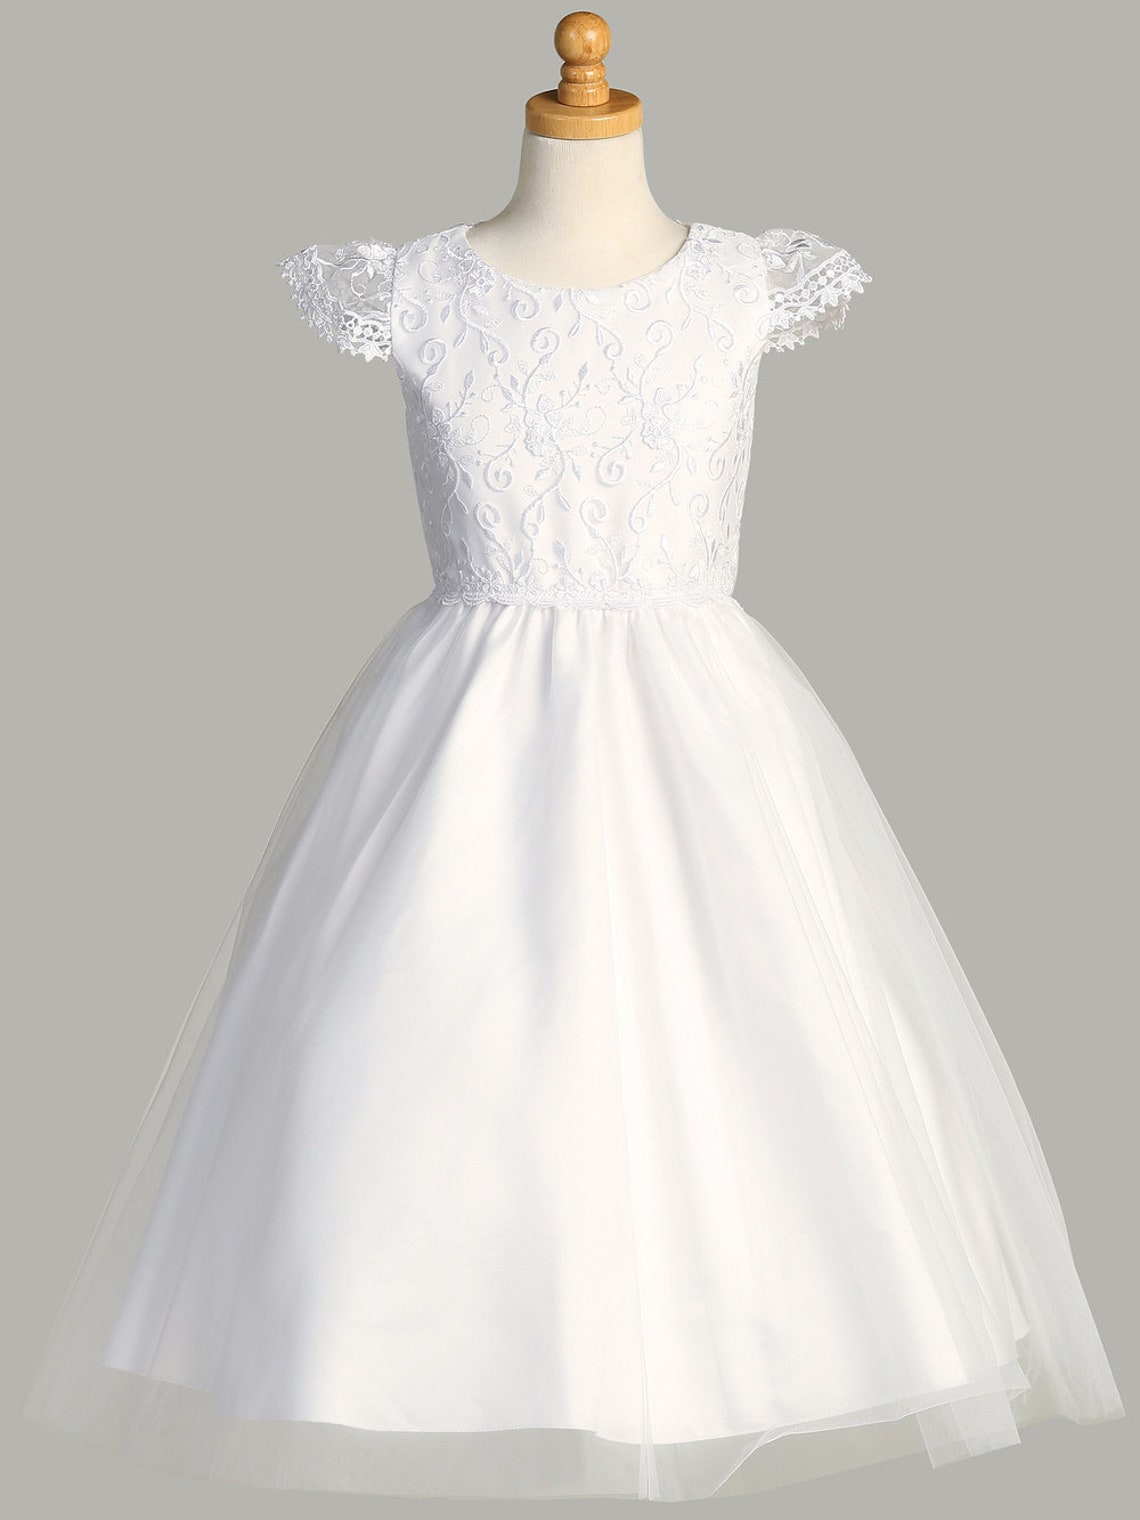 Girls First Communion Dress With Embroidered Tulle Bodice and - Etsy